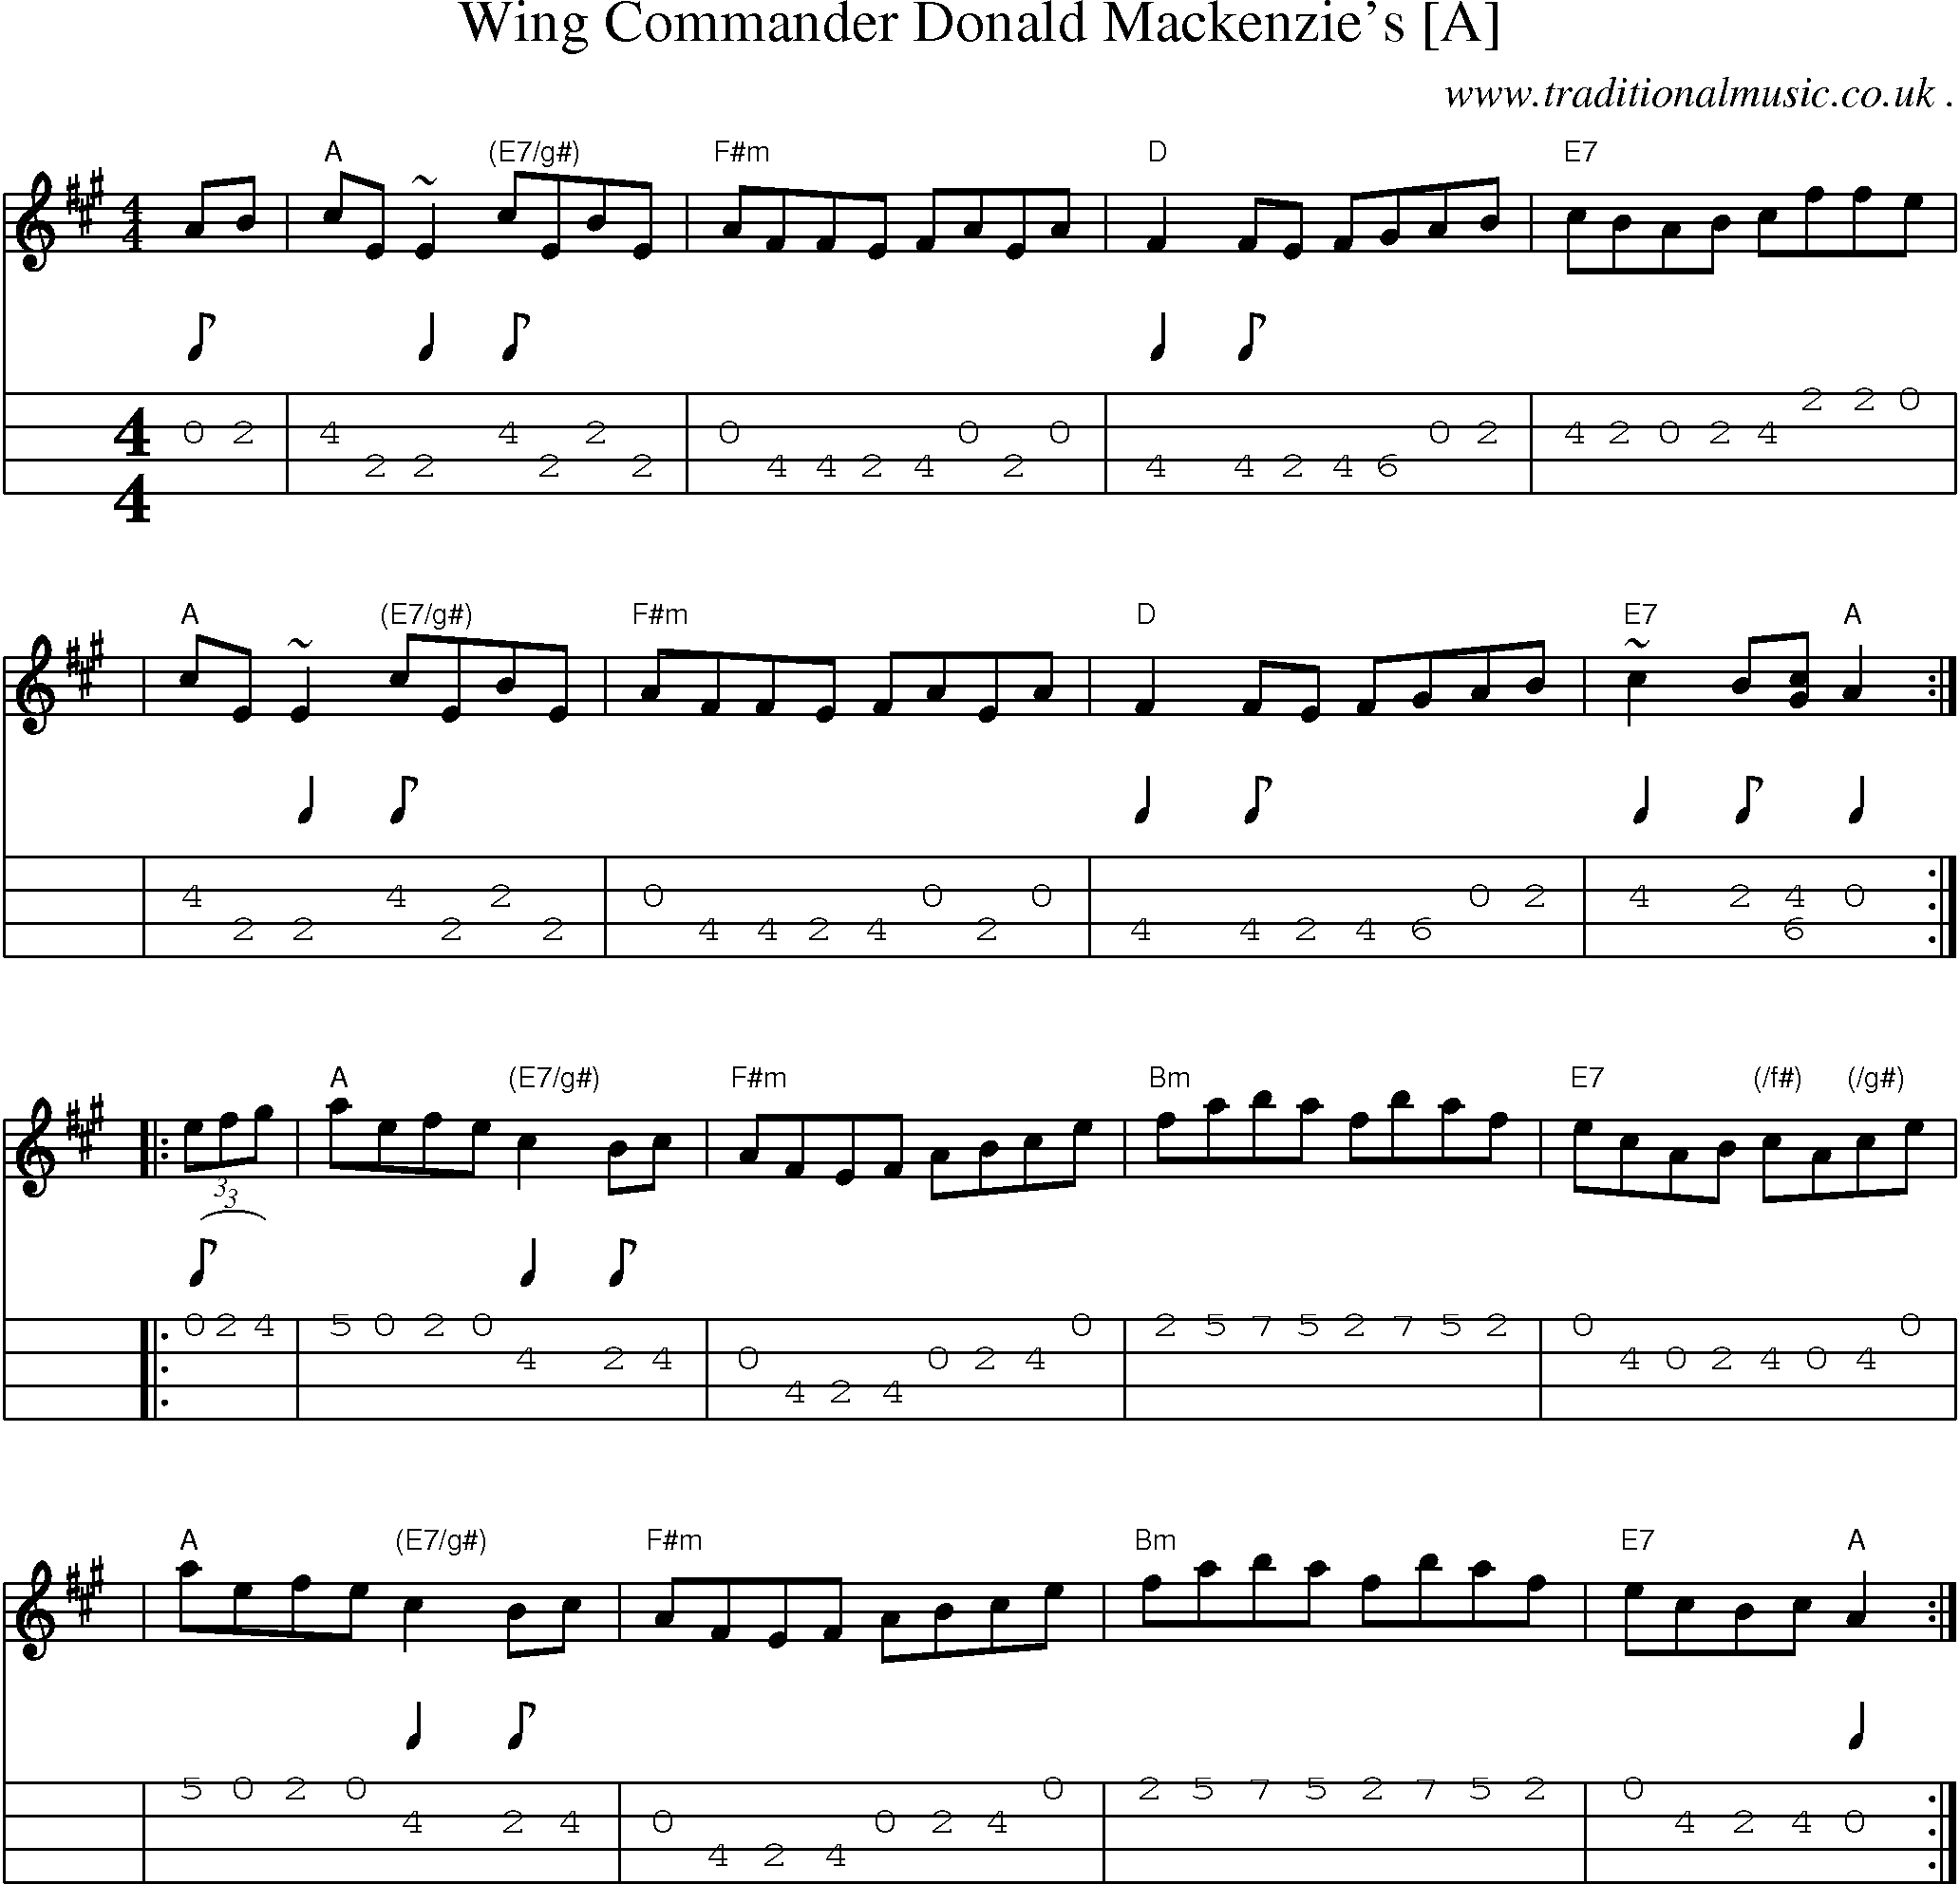 Sheet-music  score, Chords and Mandolin Tabs for Wing Commander Donald Mackenzies [a]